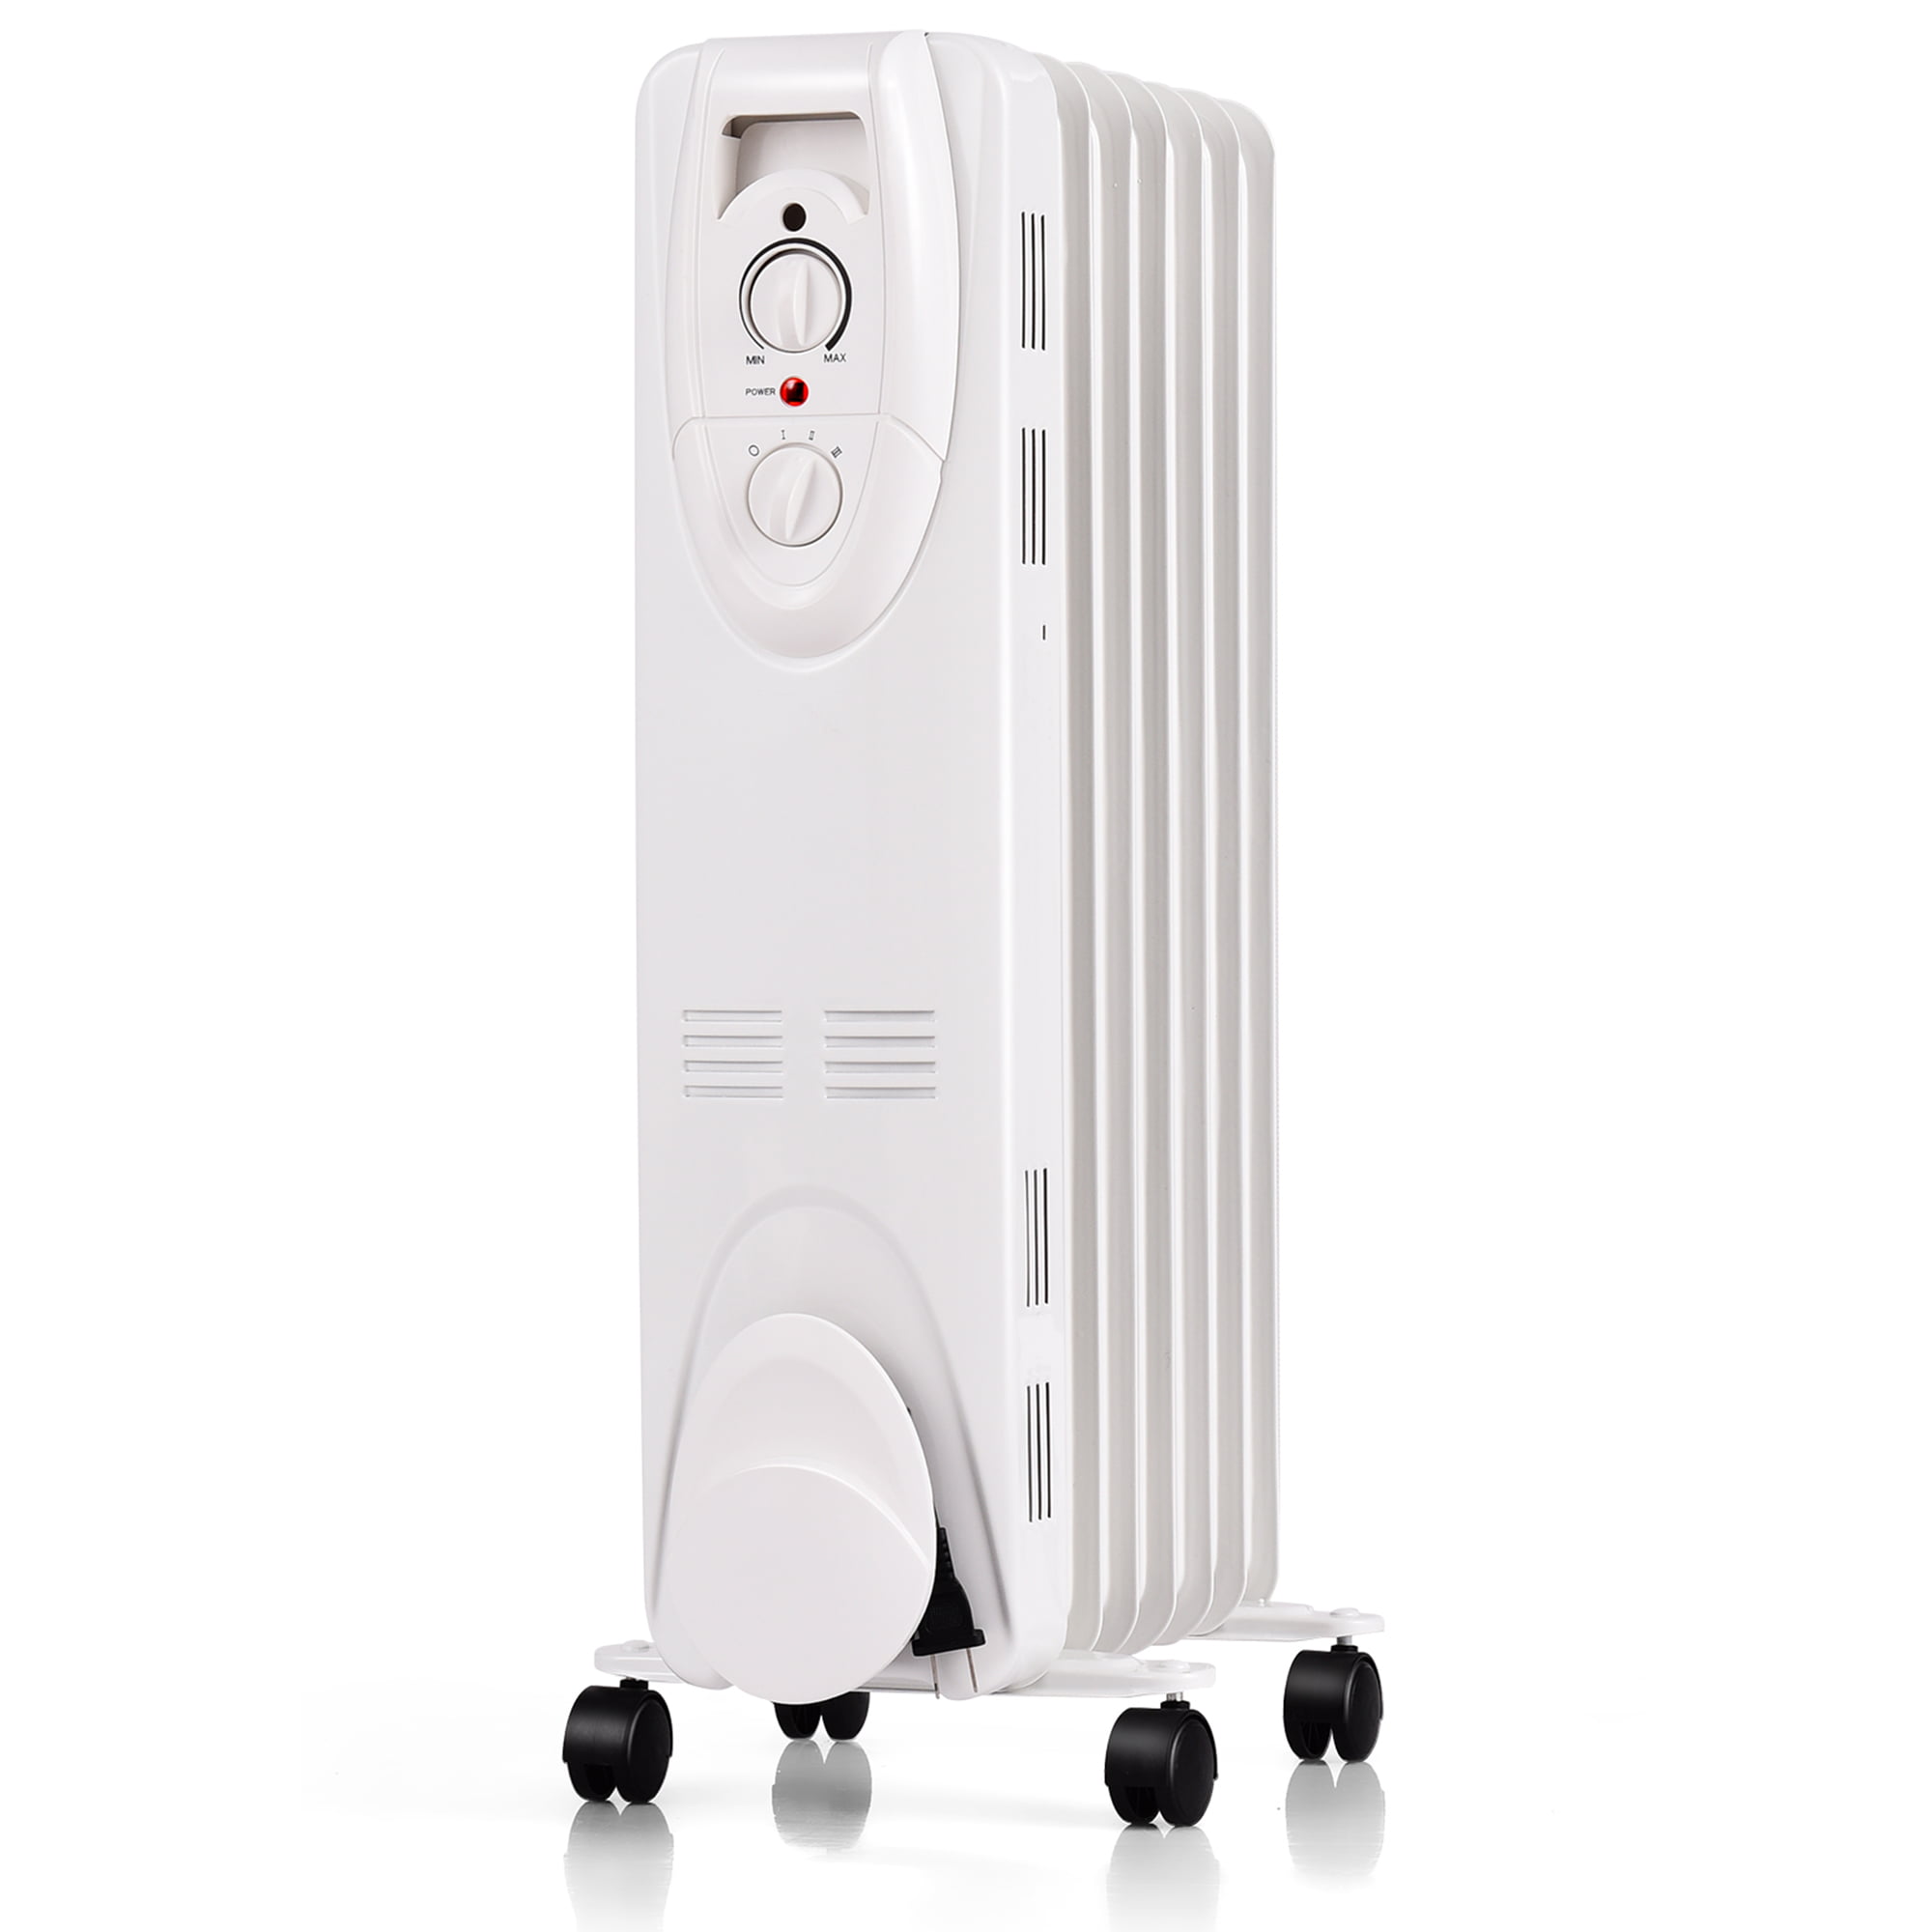 1500W Portable Electric Oil Filled Radiator Heater 7-Fin Thermostat IndoorOffice